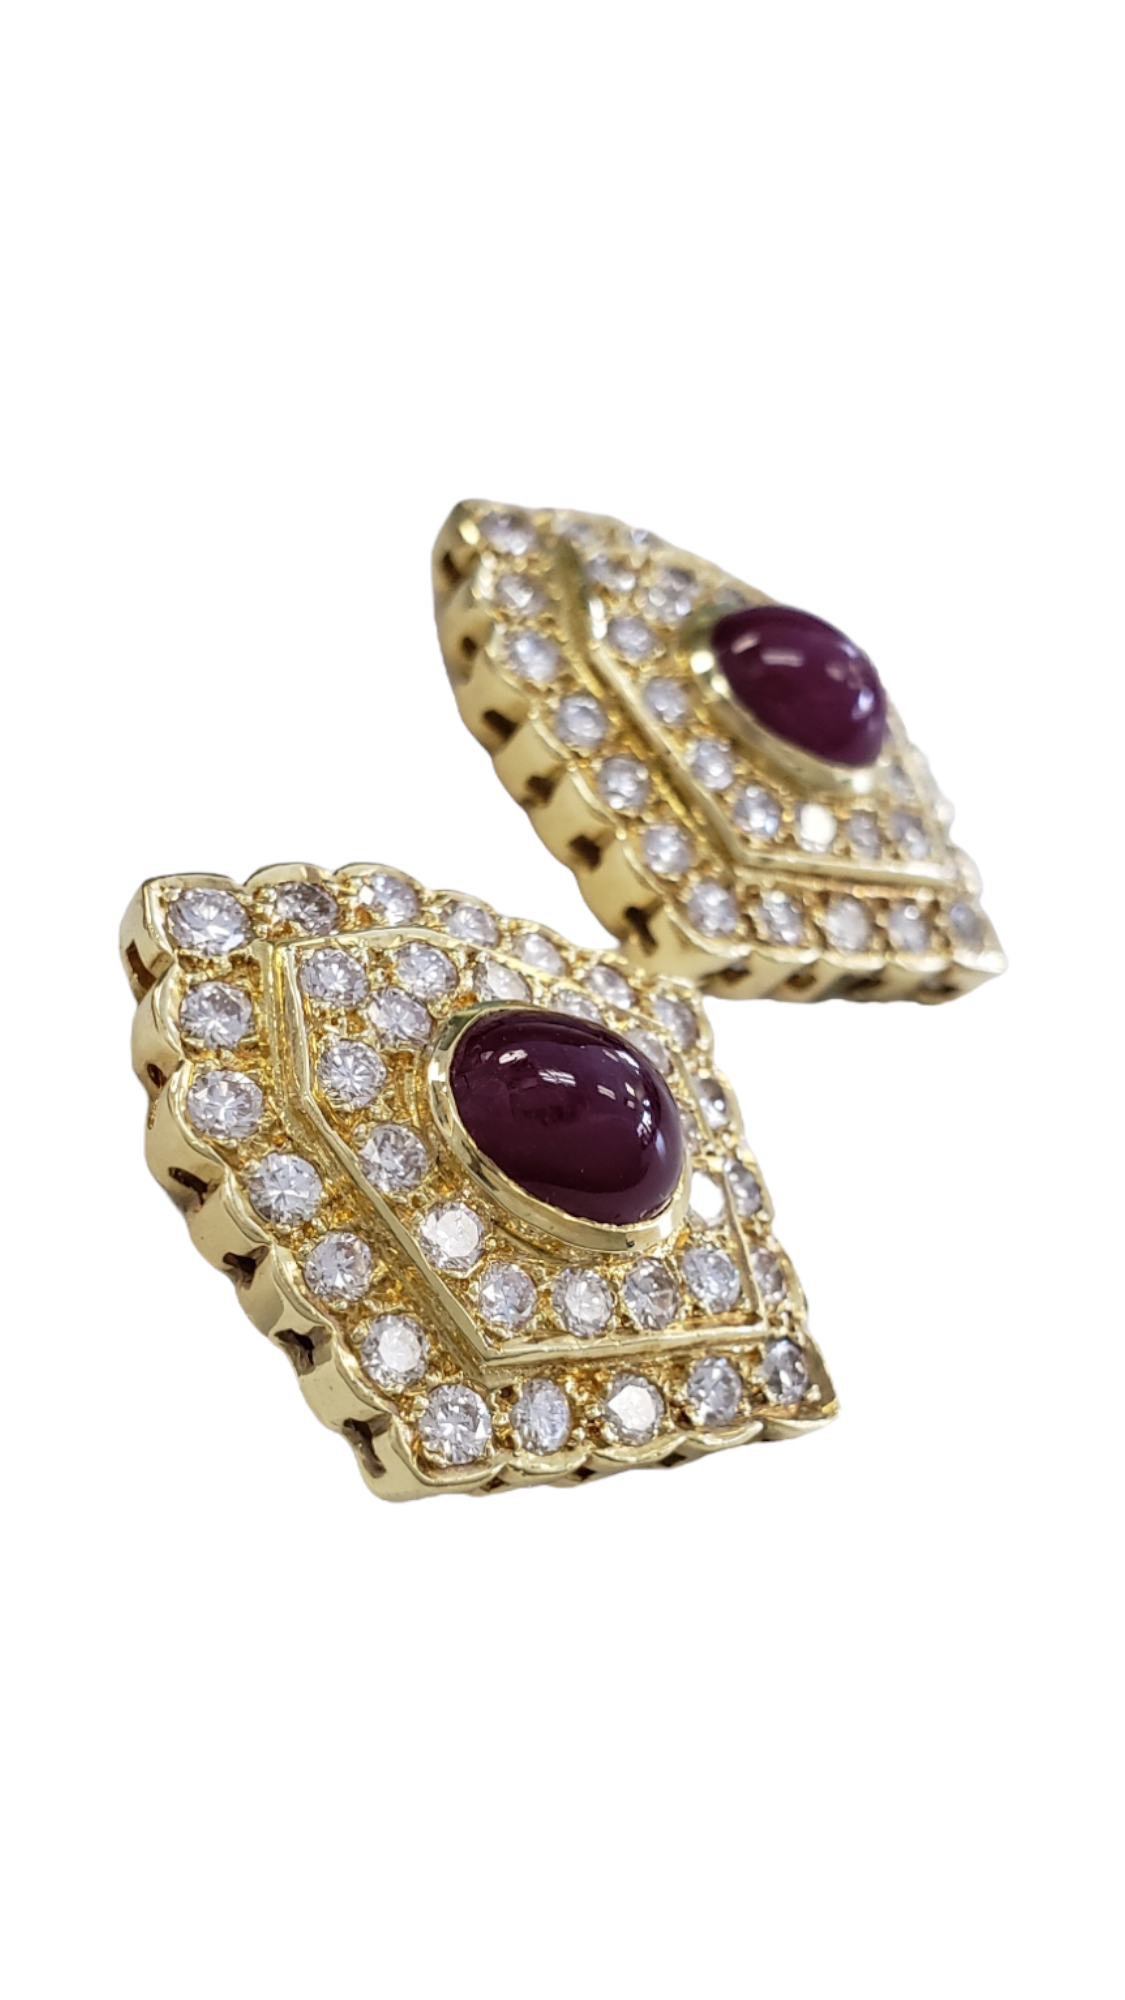 Cabochon Ruby and Diamond Women's Earrings made in 18-karat Yellow Gold w/ Omega Clips